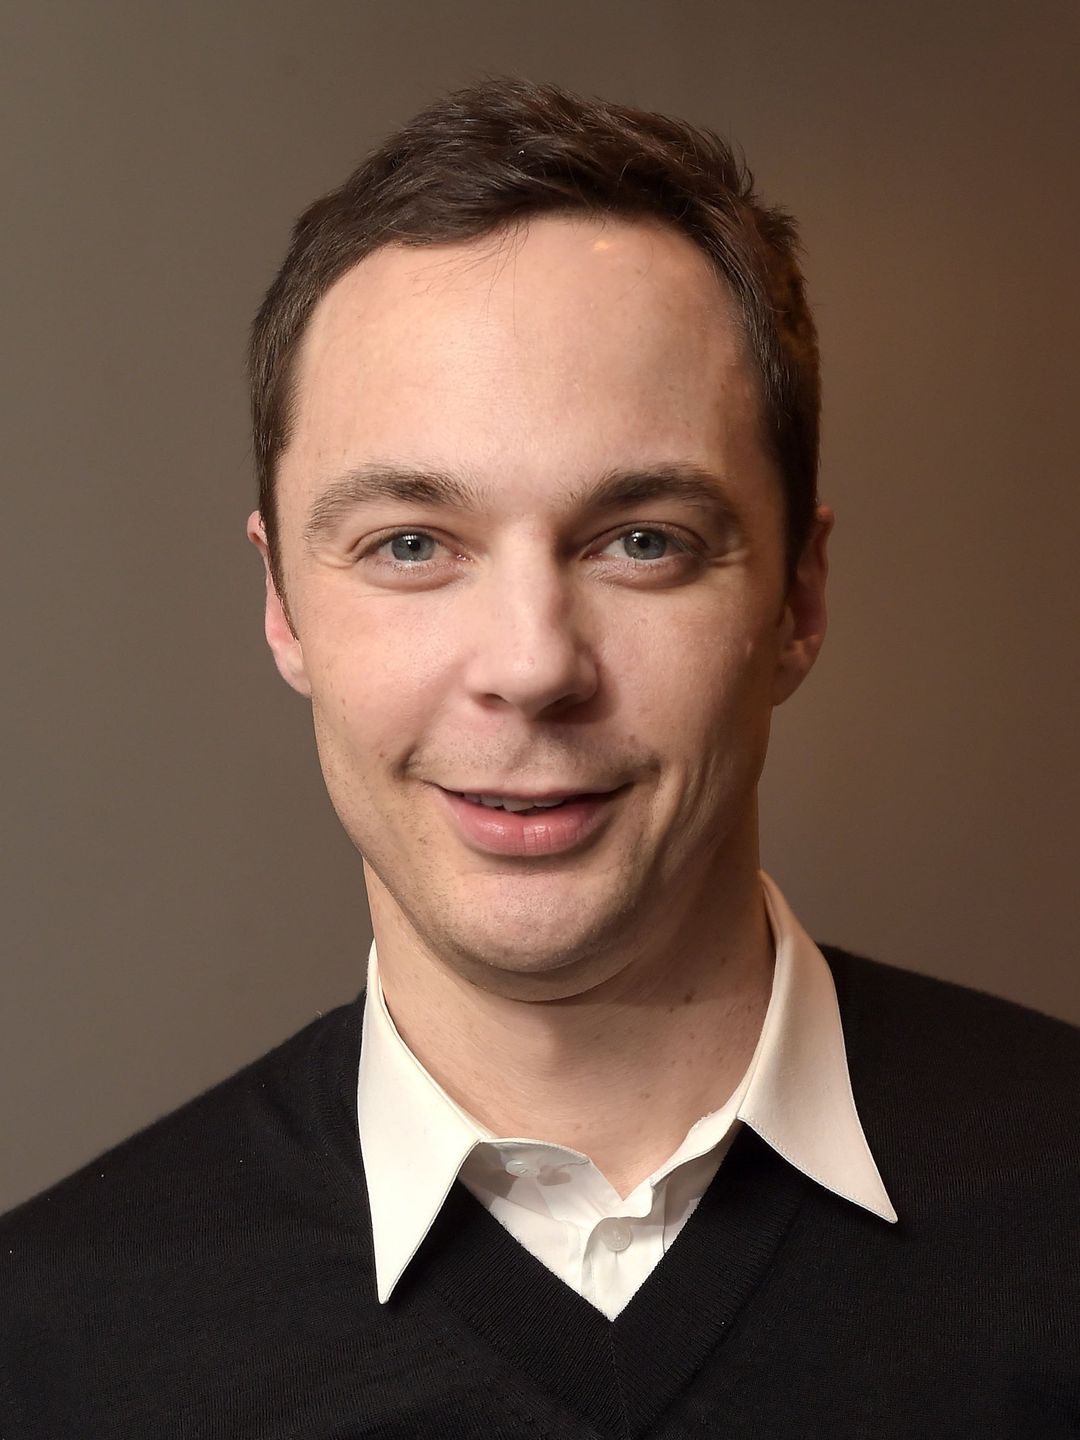 Jim Parsons who is he